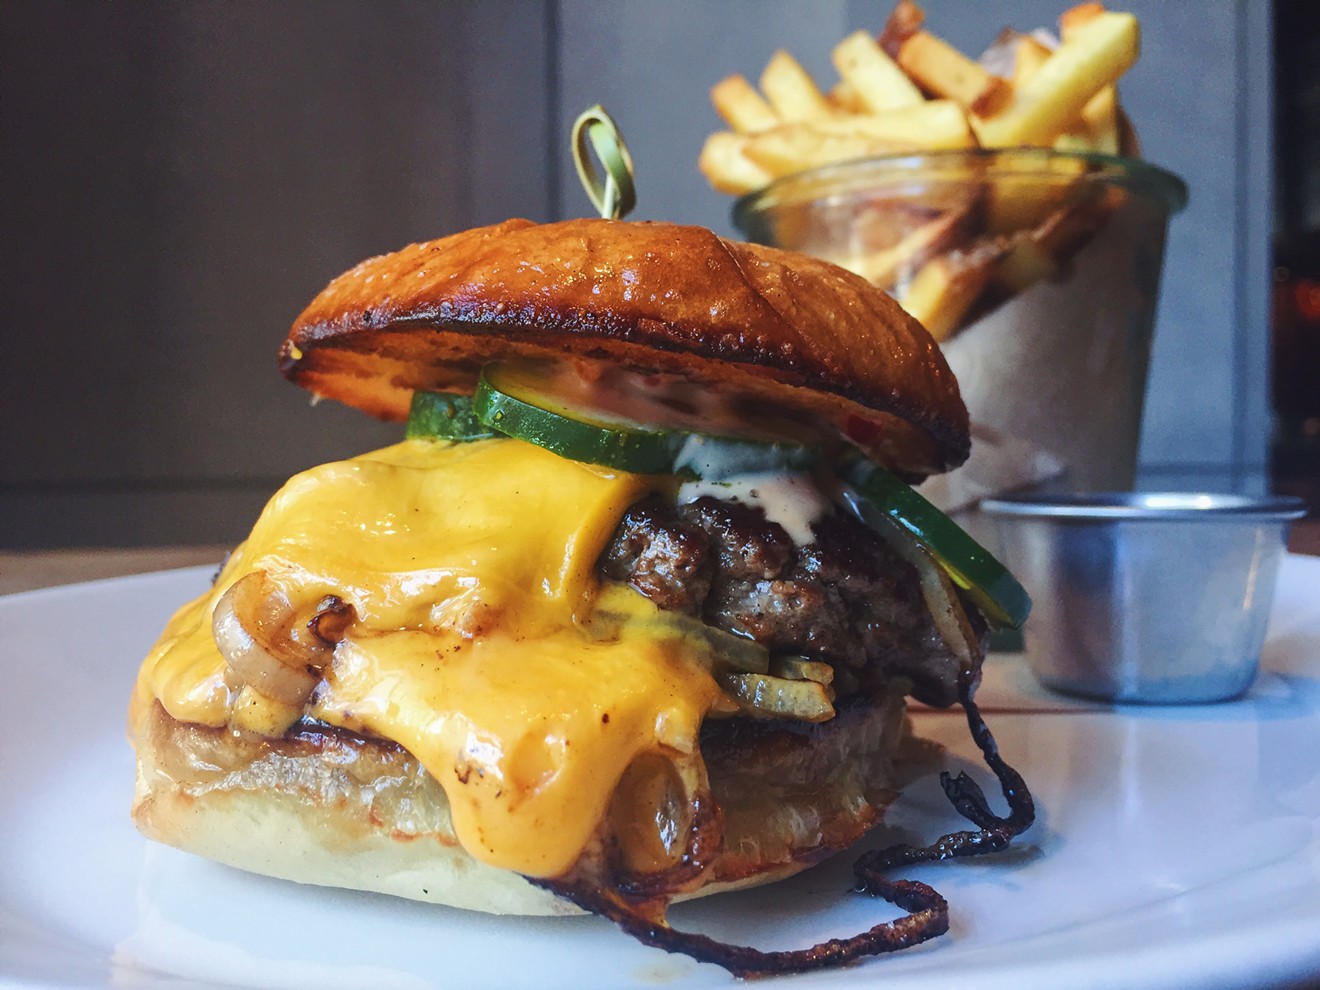 The double cheeseburger at CBD Provisions, under Executive Chef Thomas ‘Coner’ Seargeant, for $15.